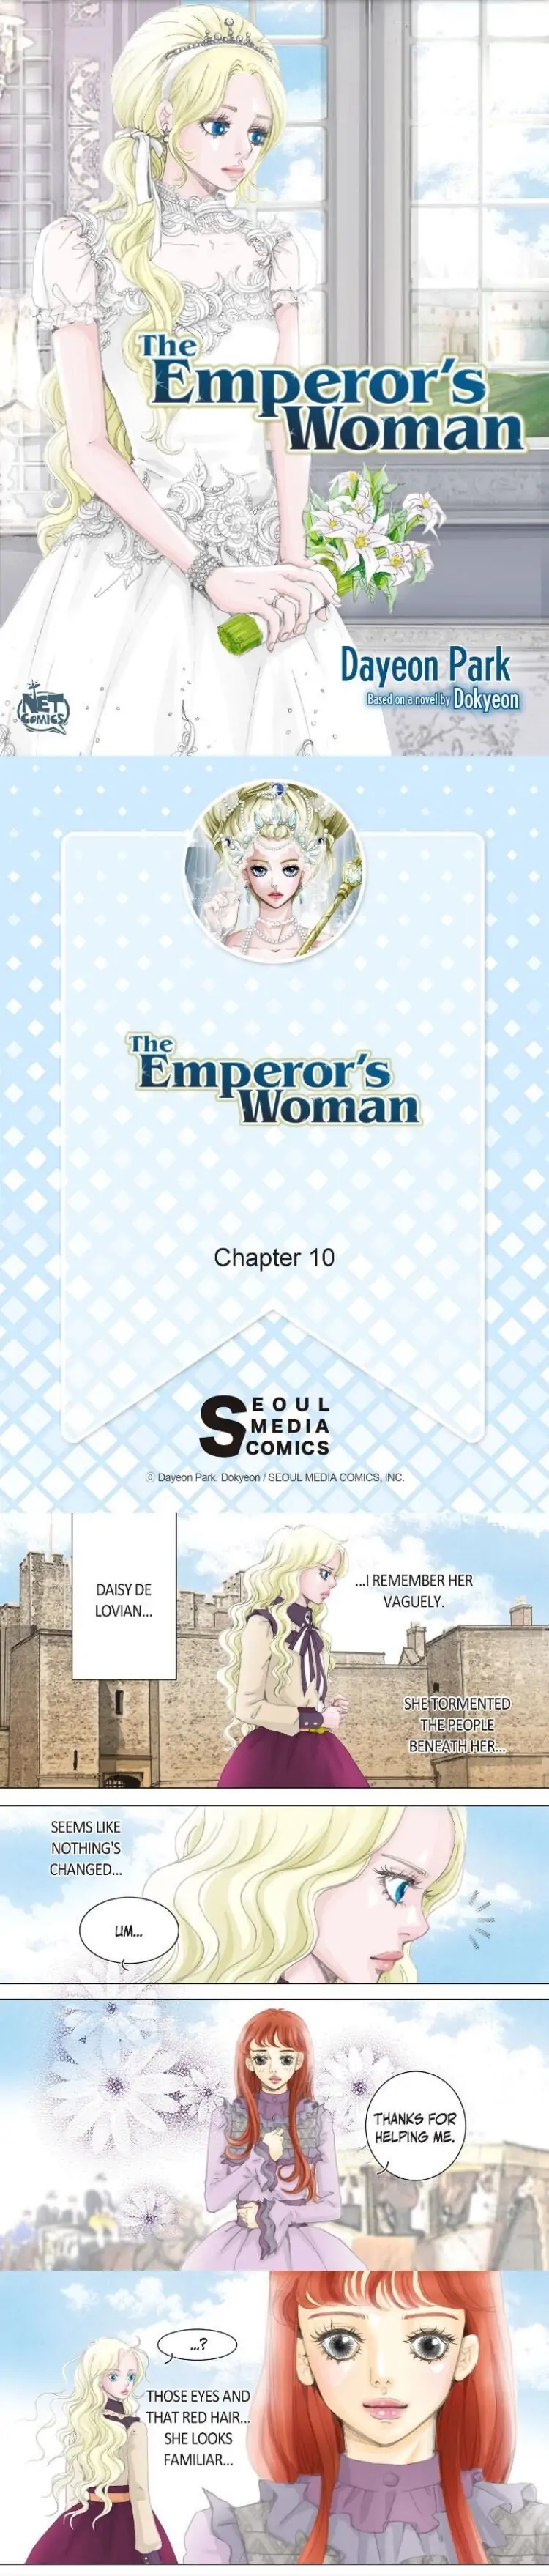 The Emperor’s Woman chapter 10